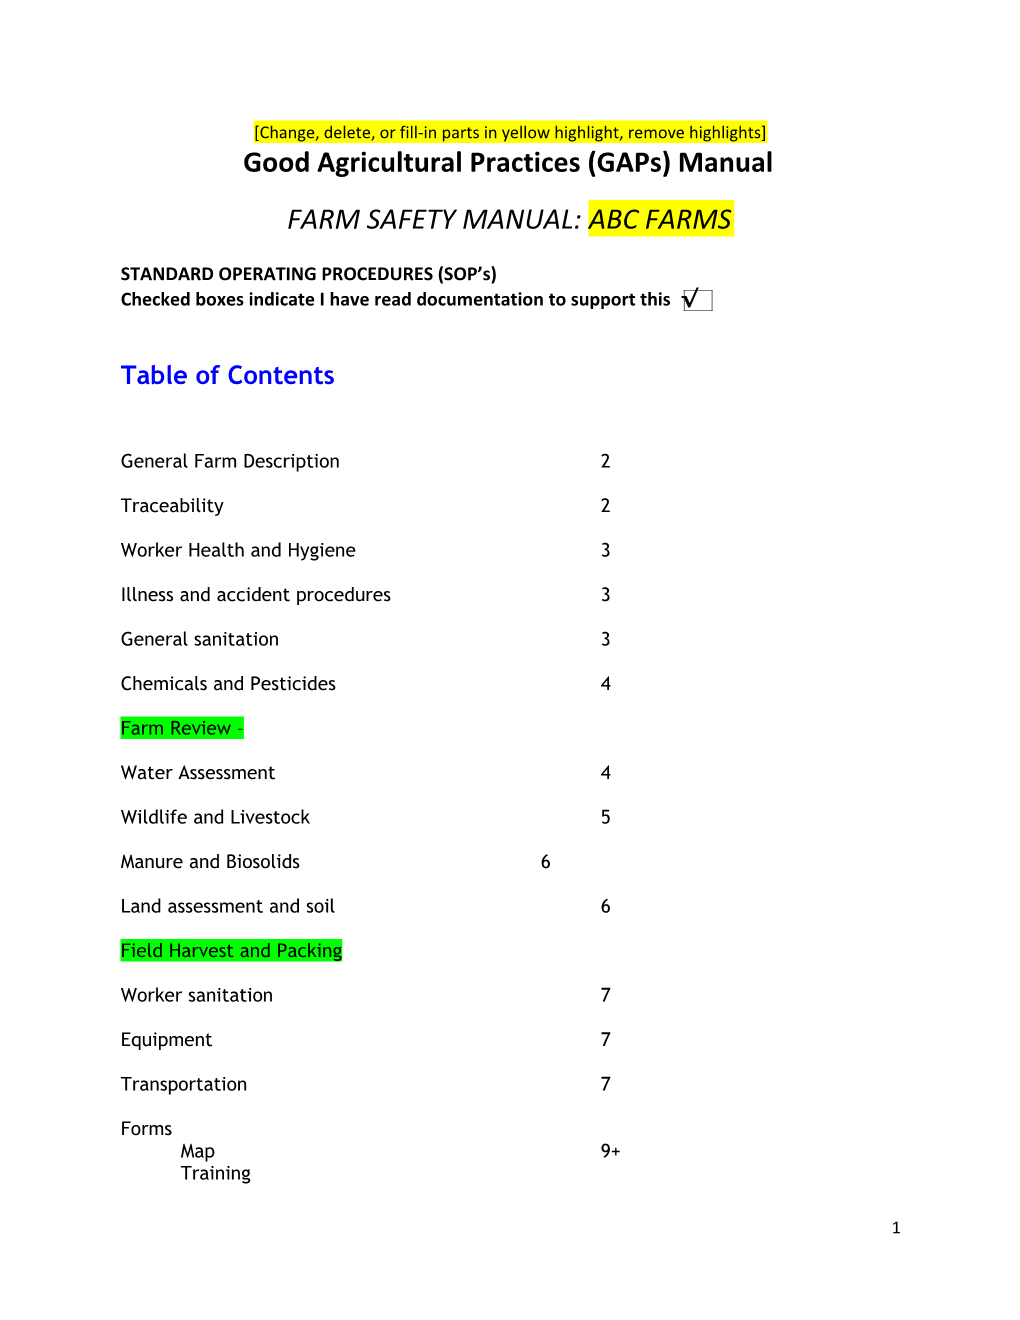 Good Agricultural Practices (Gaps) Manual